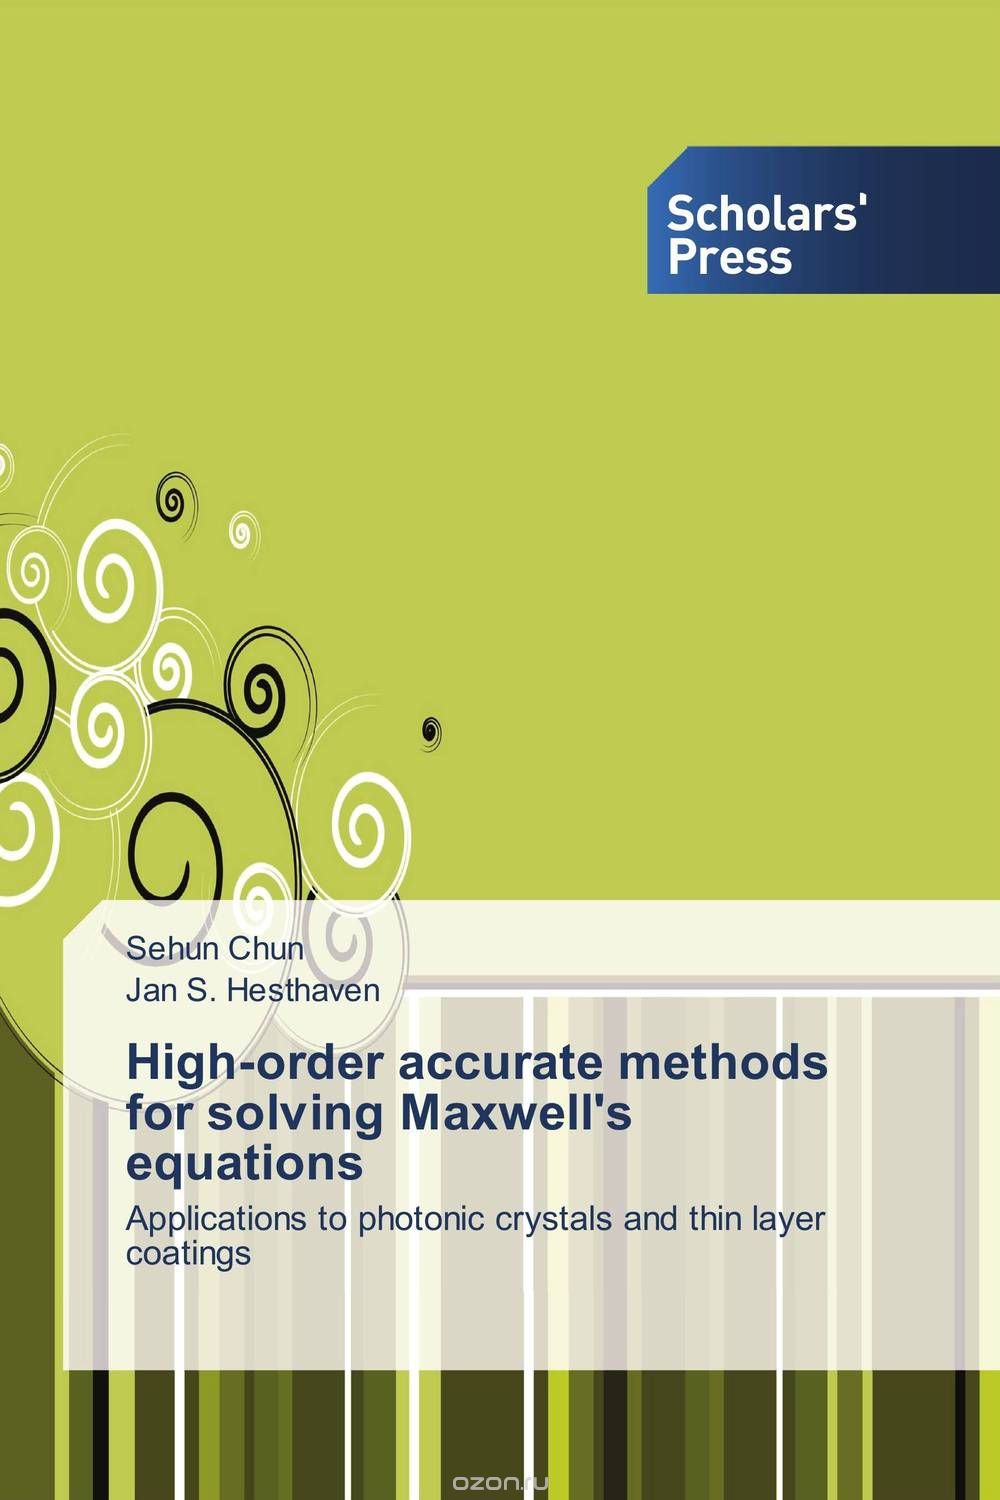 High-order accurate methods for solving Maxwell's equations